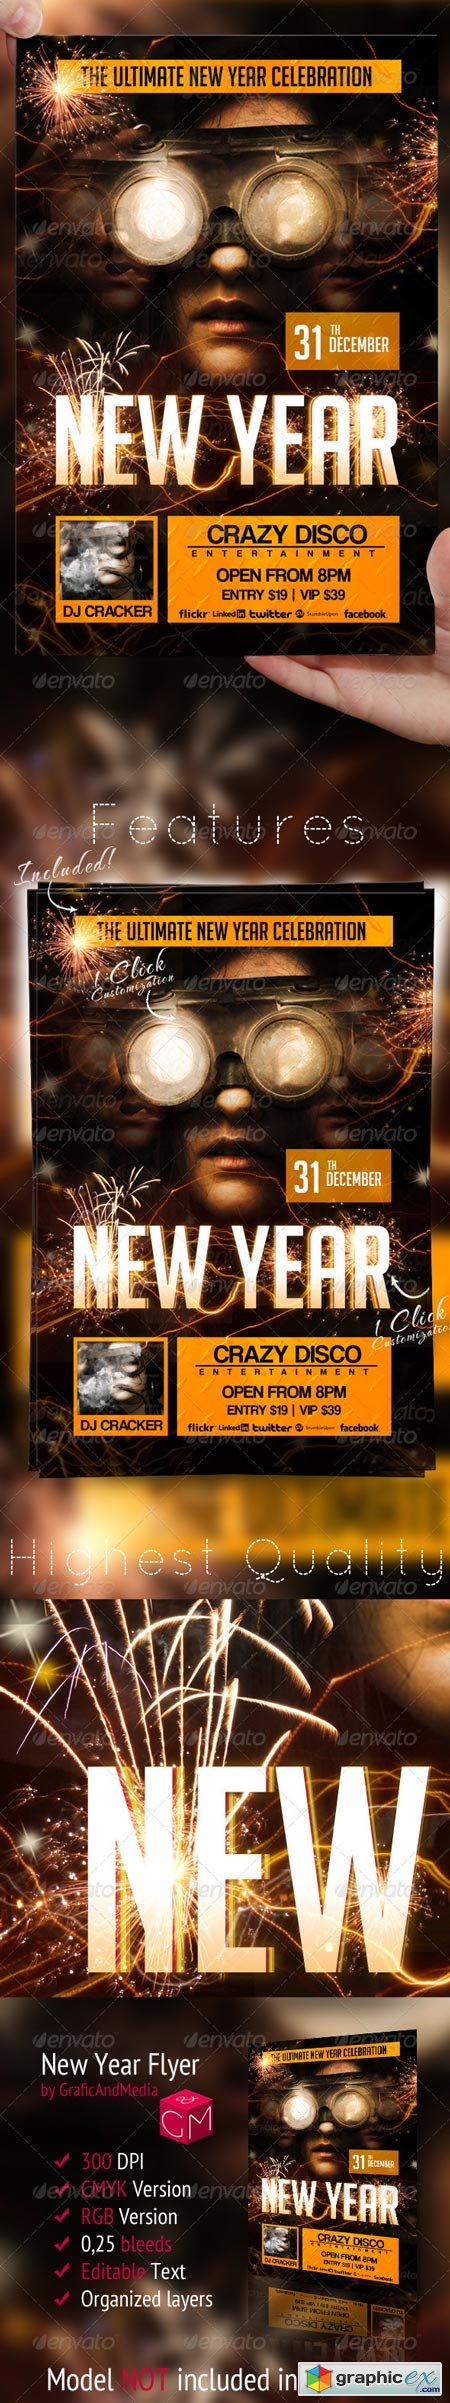 New Year Flyer Template 3093241